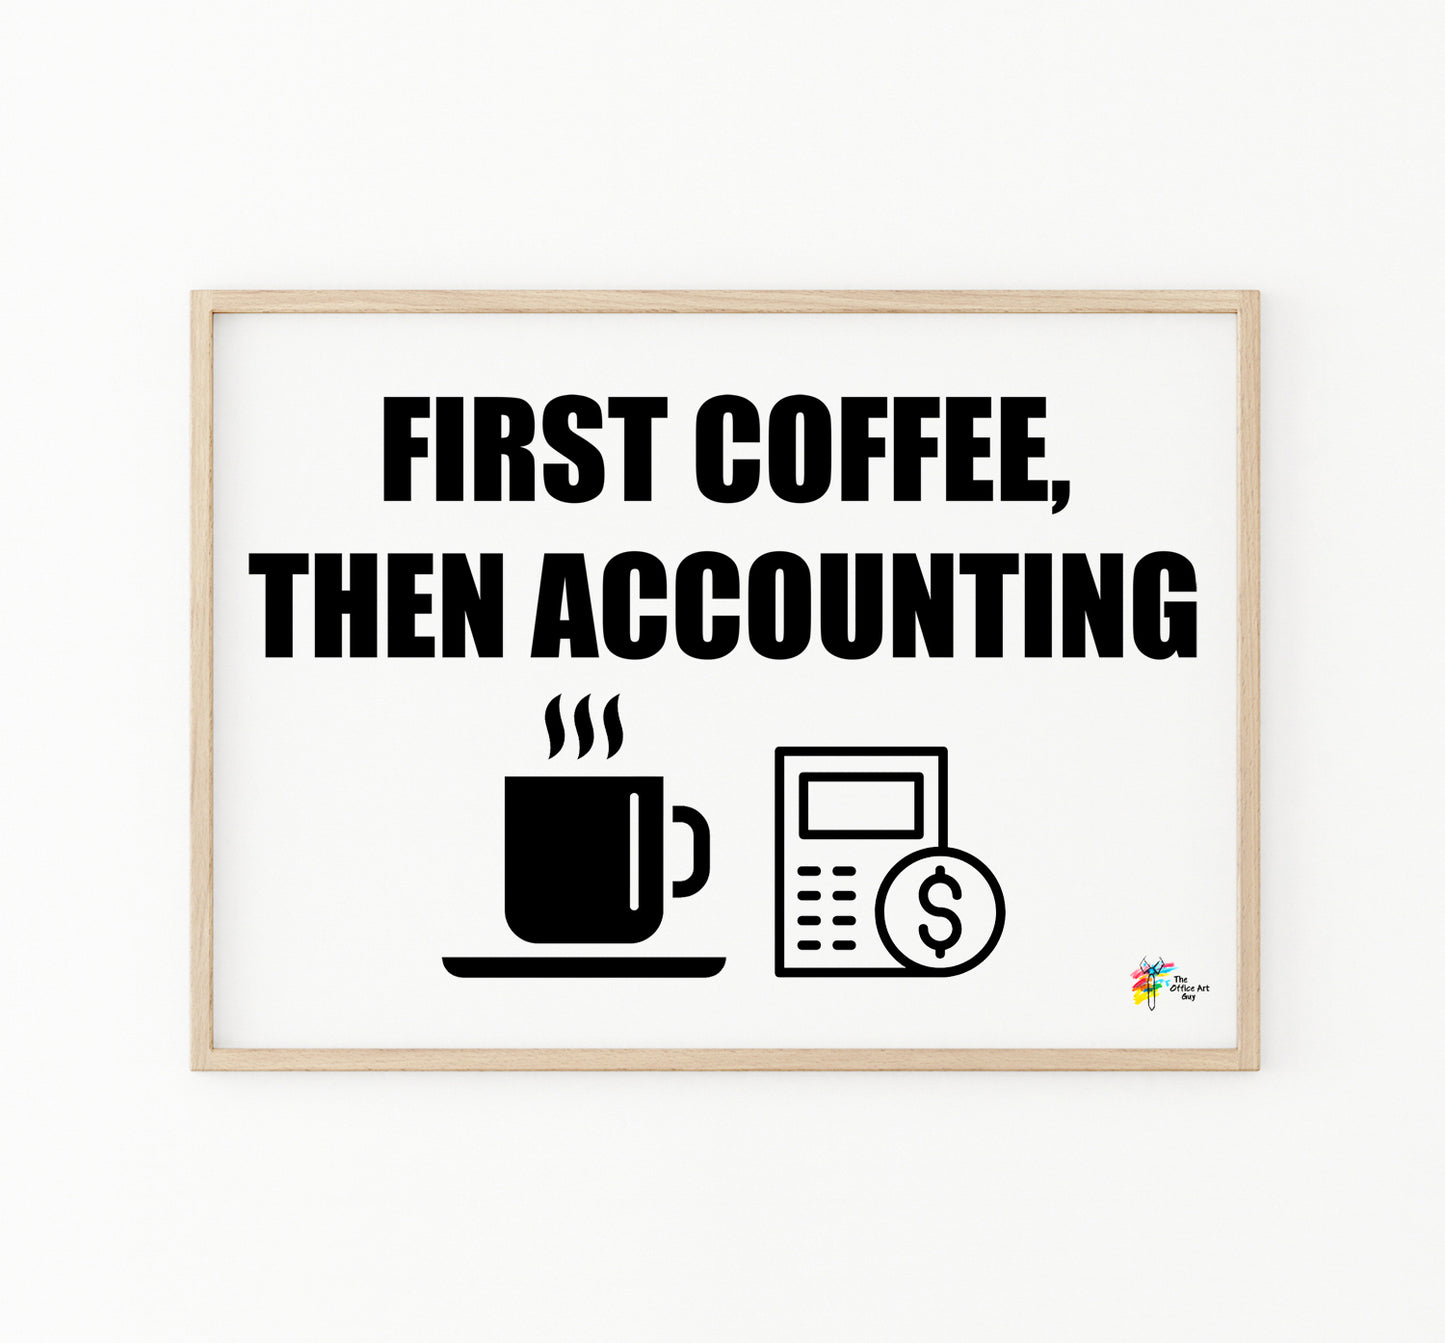 Accountant Wall Art - First Coffee, Then Accounting